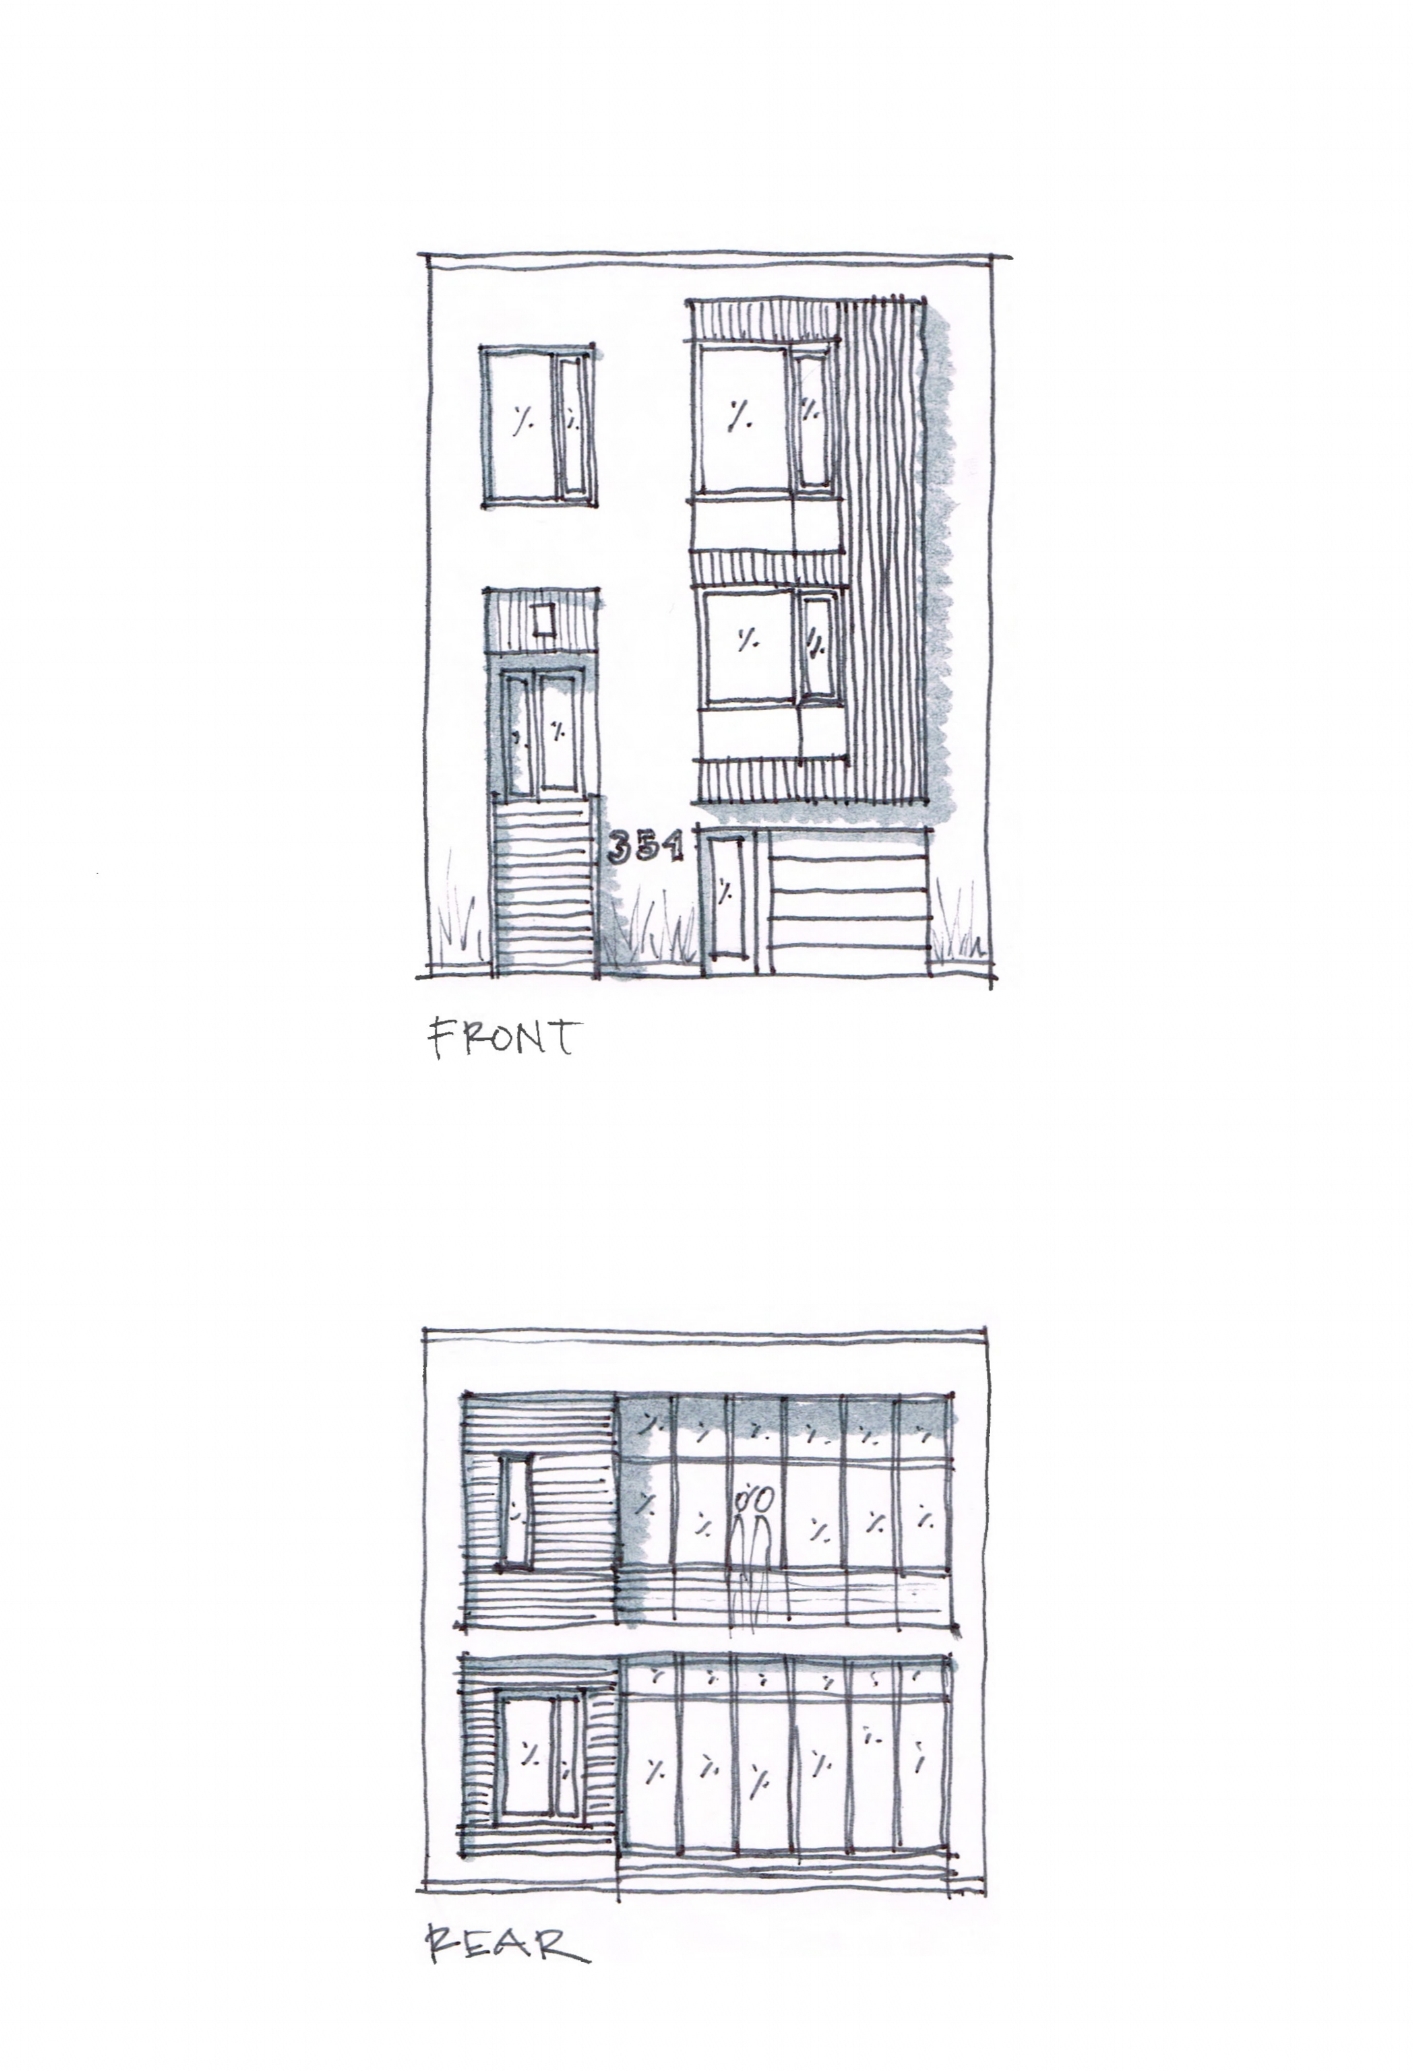 354 27th Ave Elevation Sketches_Page_1.jpg